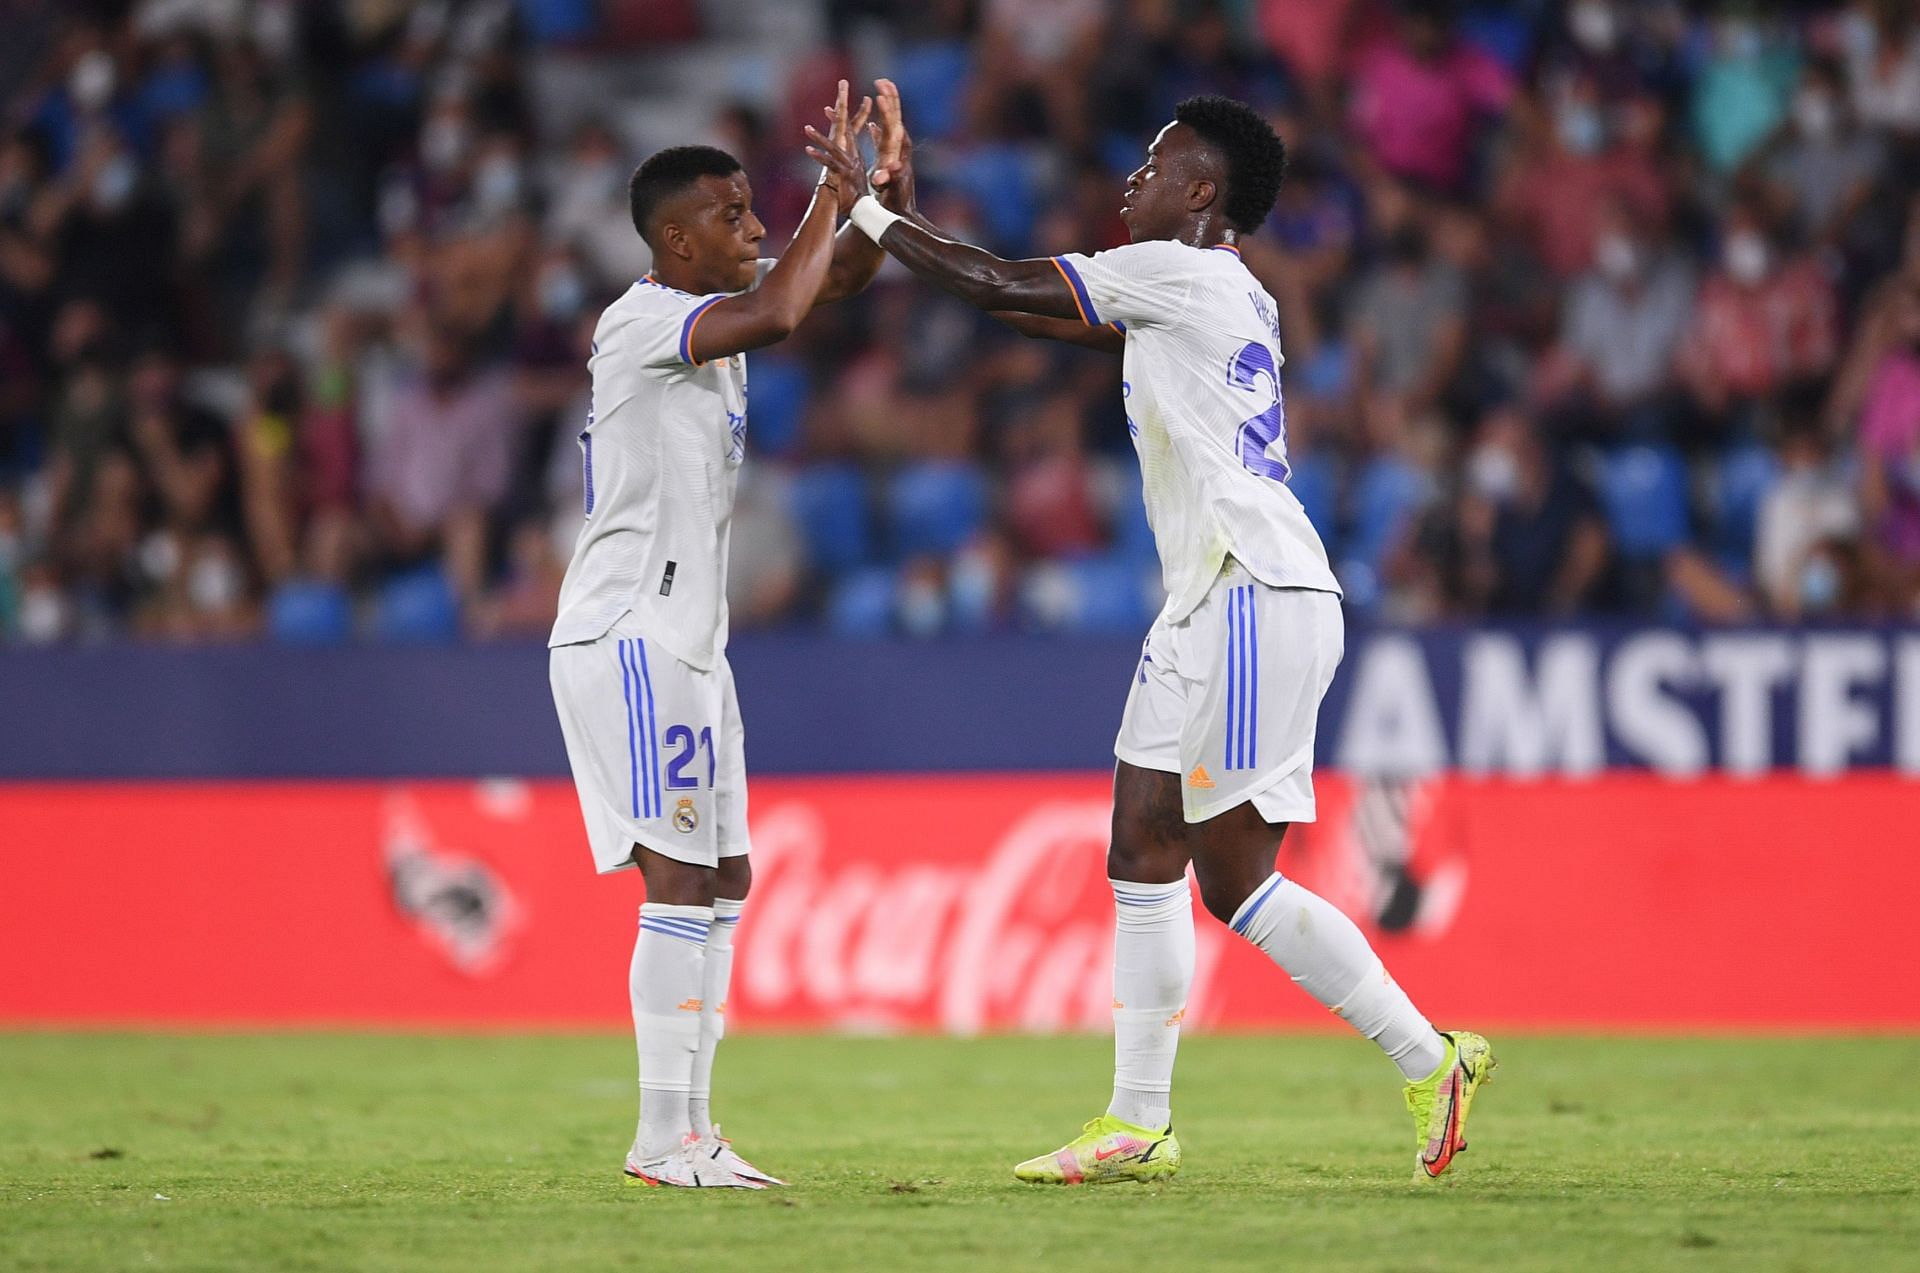 Rodrygo (L) and Vinicius Jr. are already stars for Real Madrid